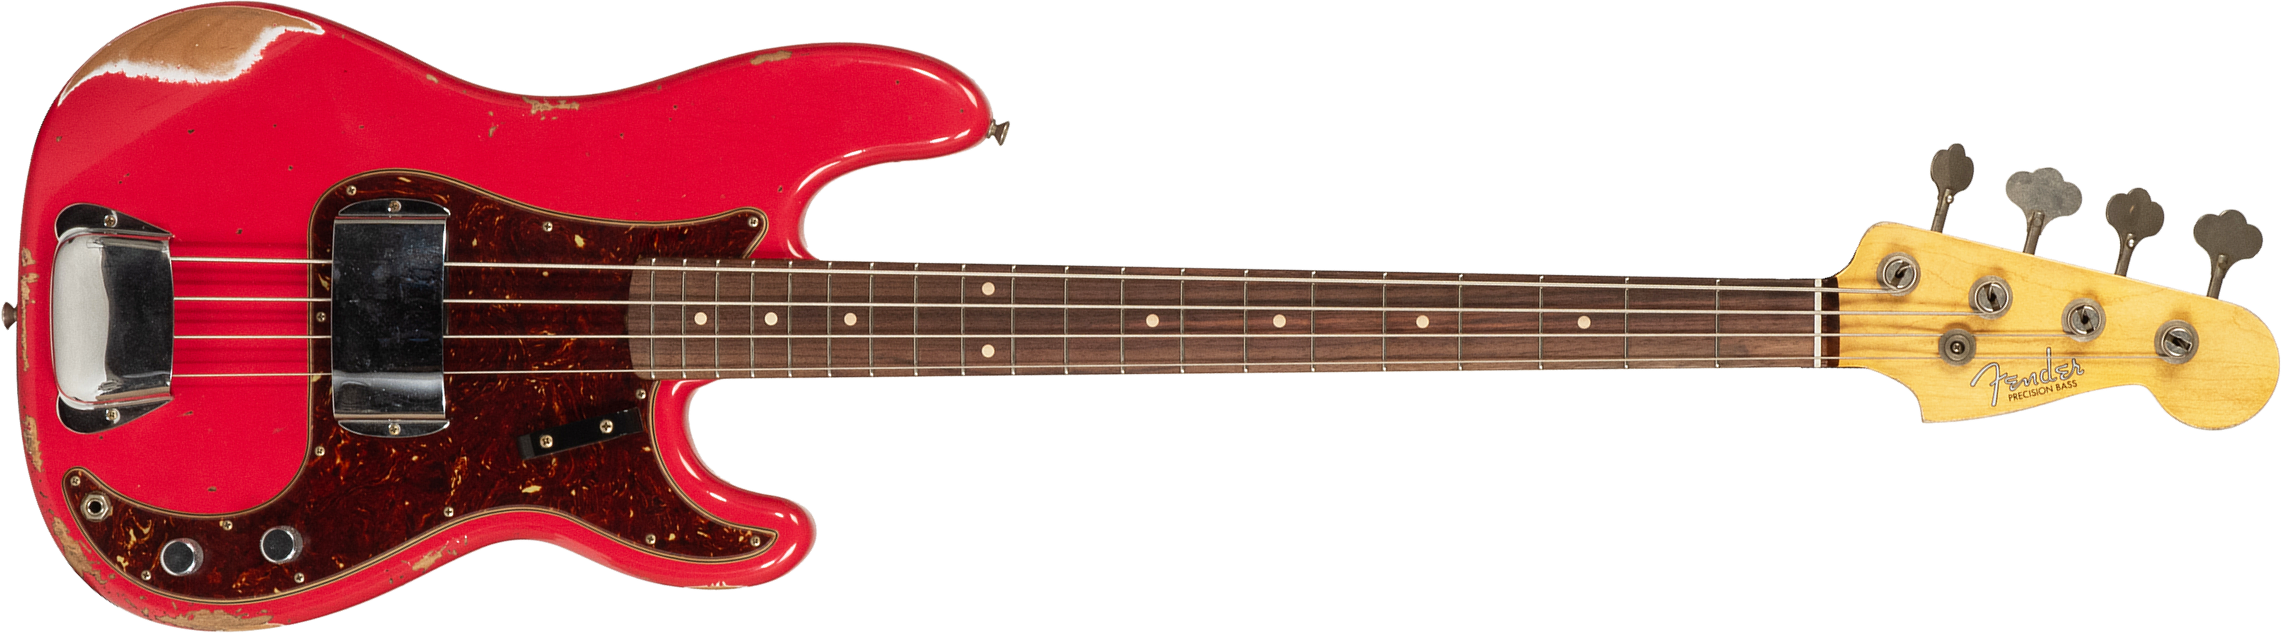 Fender Custom Shop Precision Bass 1960 Rw #r117926 - Heavy Relic Fiesta Red - Basse Électrique Solid Body - Main picture